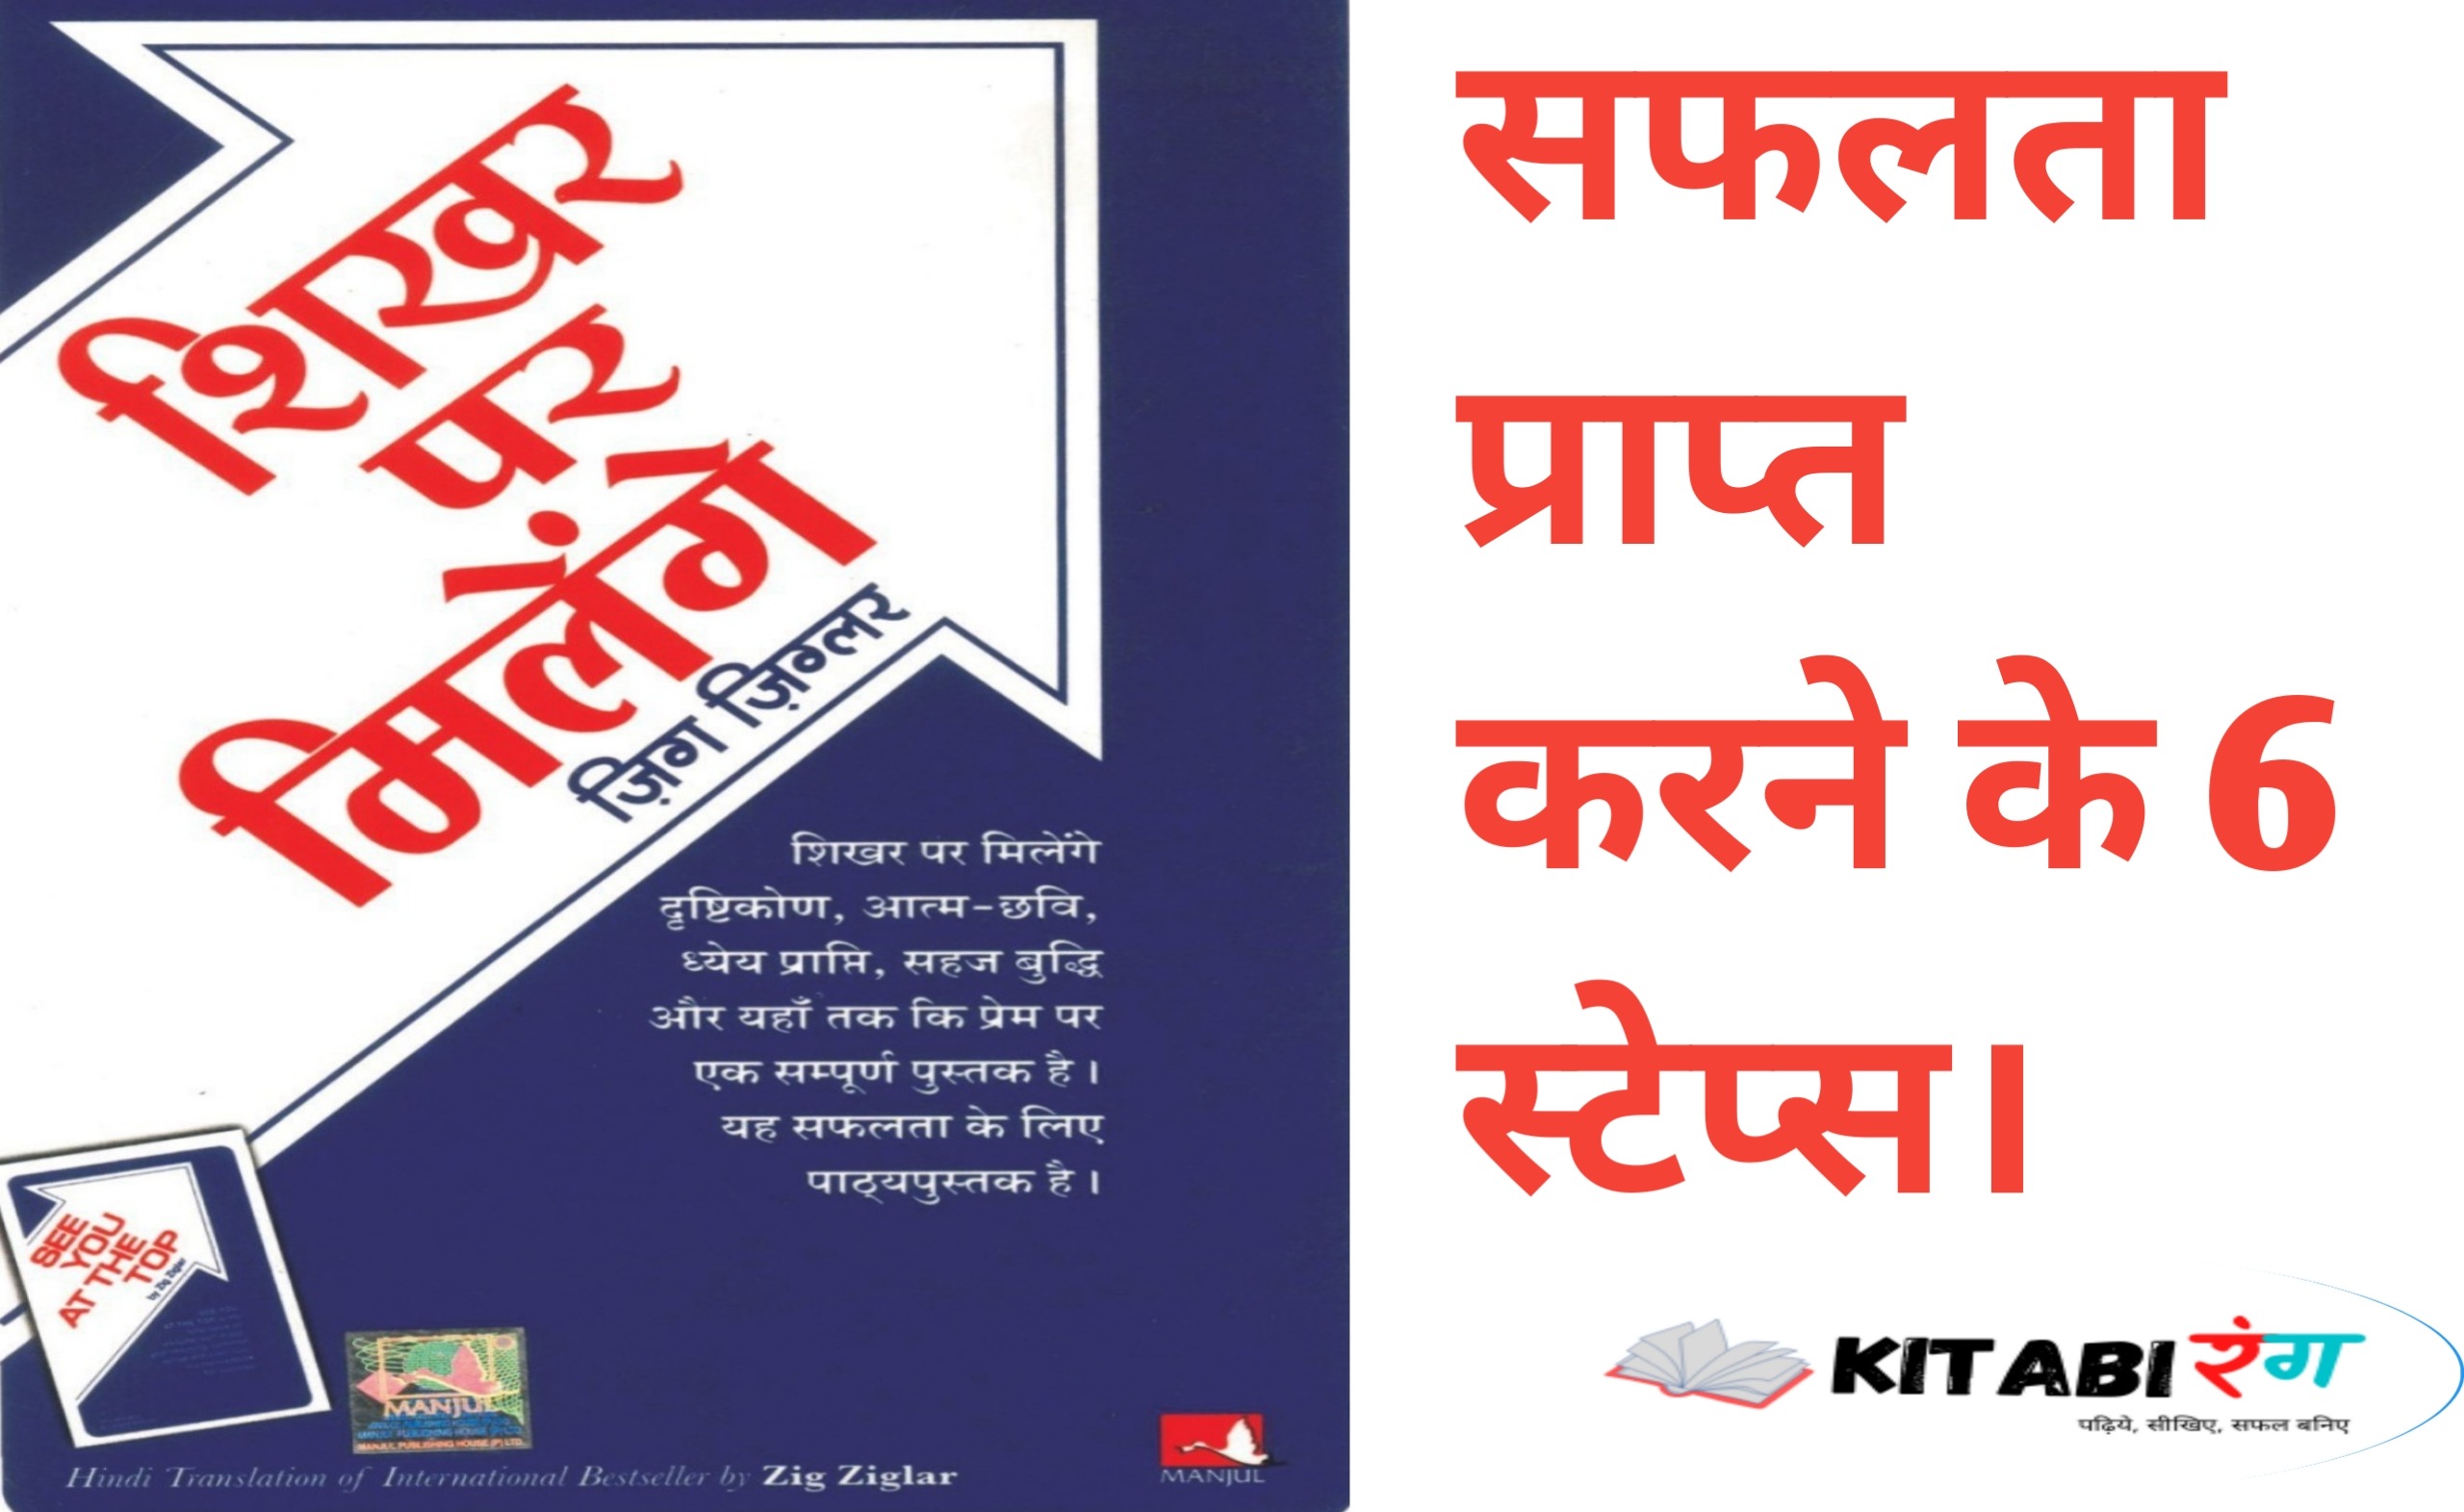 See You At The Top Book Summary In Hindi|शिखर पर मिलेंगे